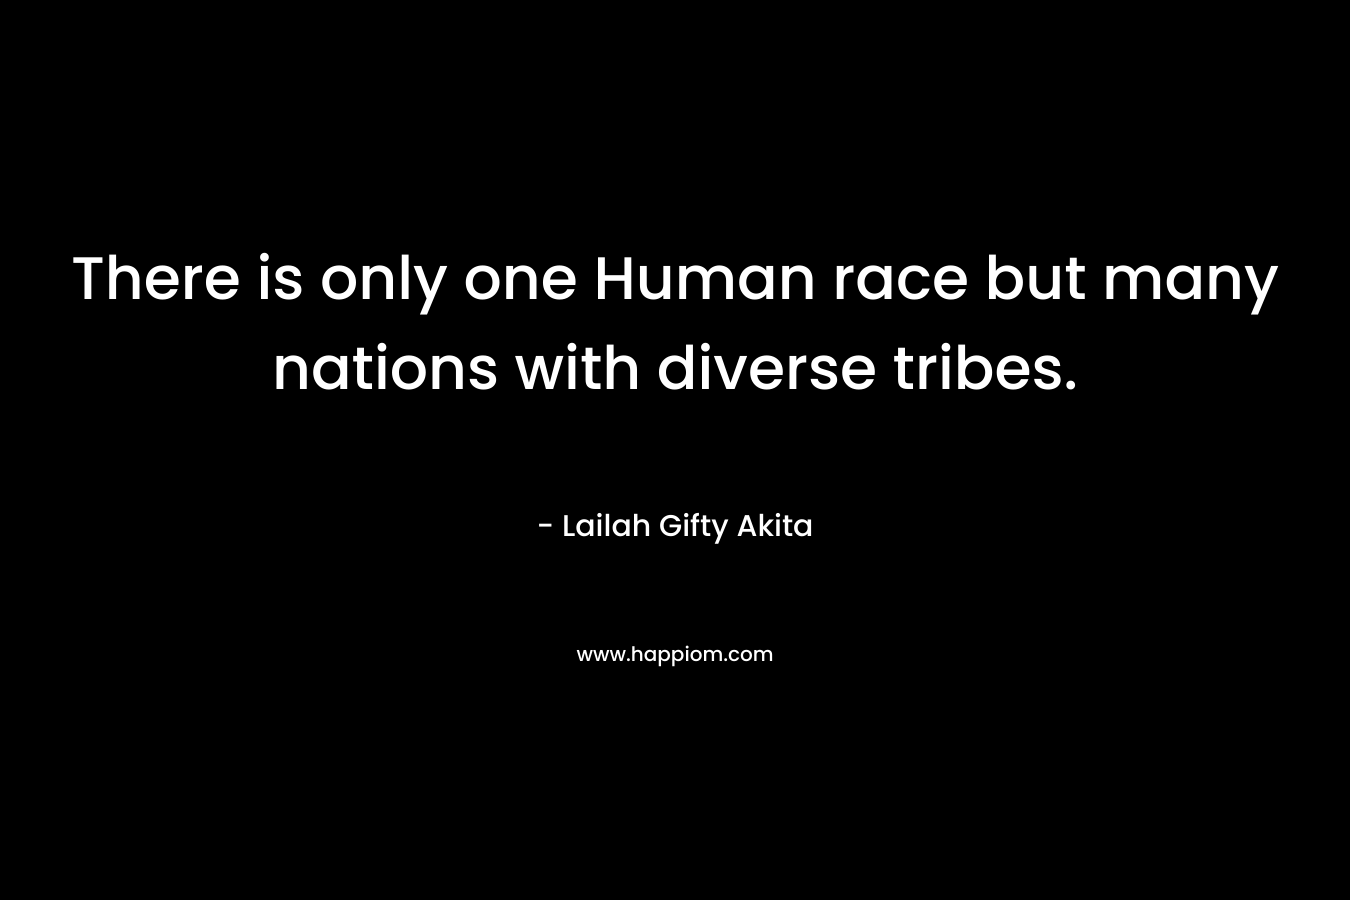 There is only one Human race but many nations with diverse tribes.